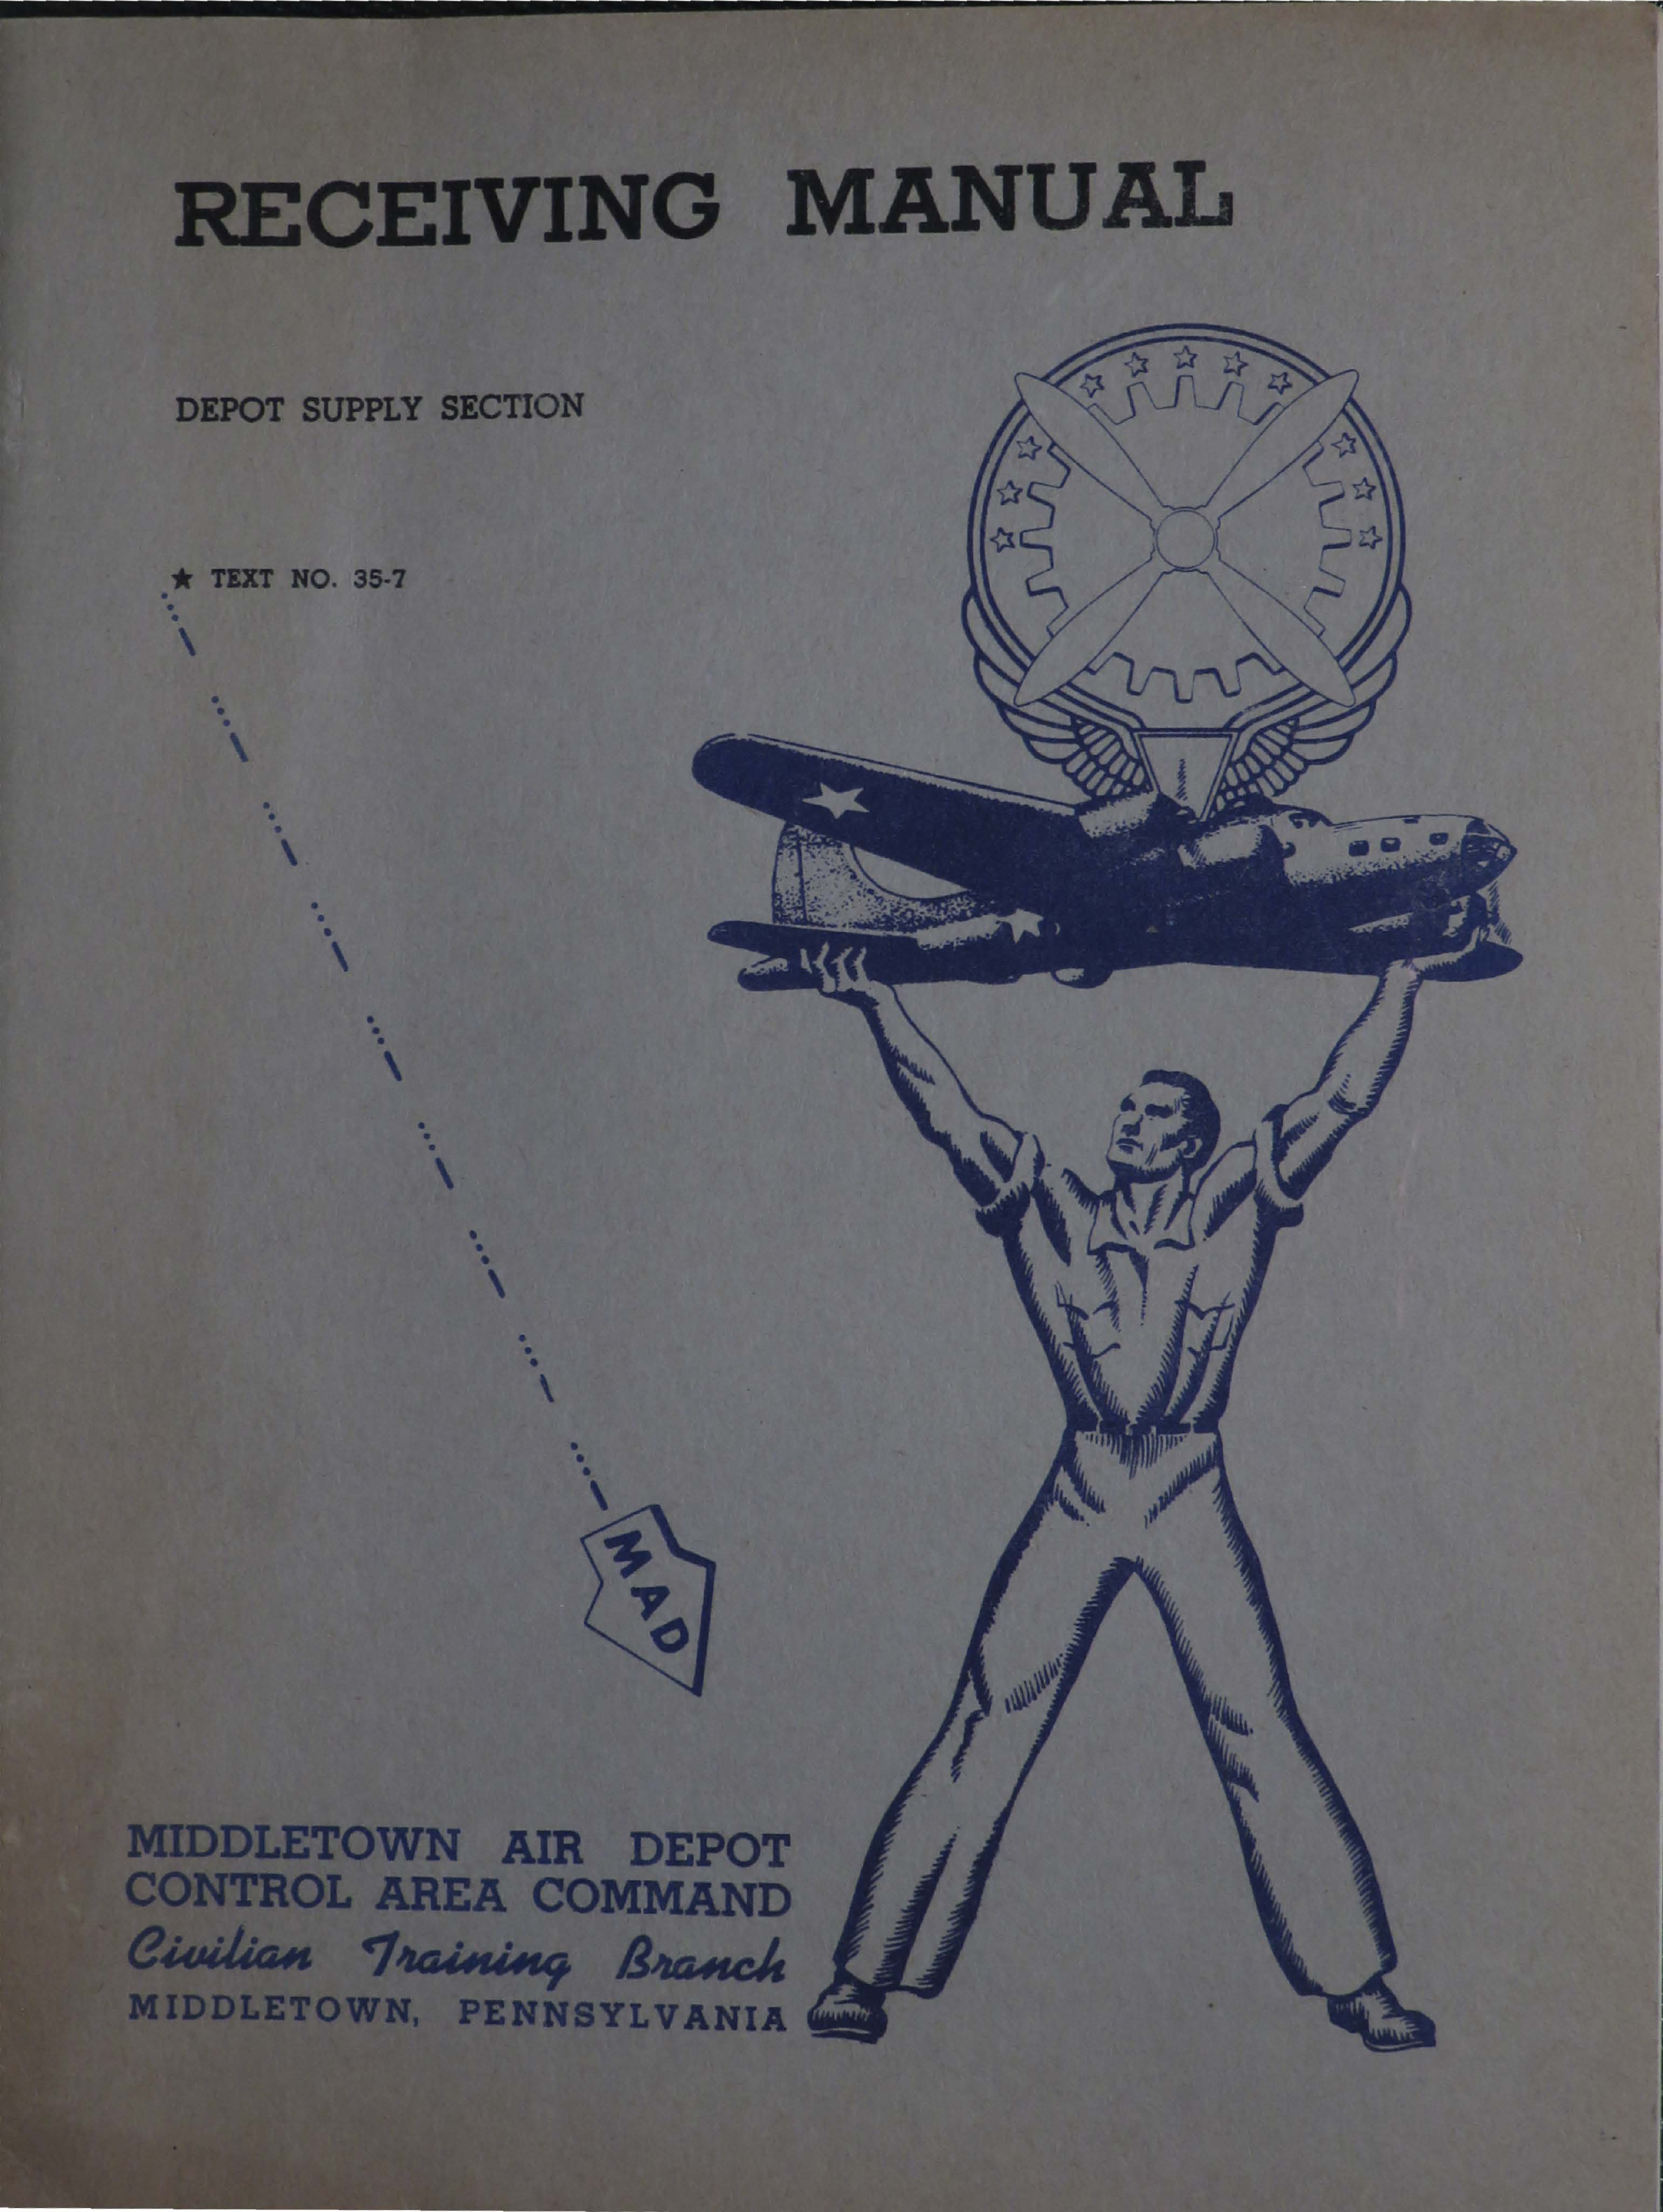 Sample page 1 from AirCorps Library document: Receiving Manual for Depot Supply Section